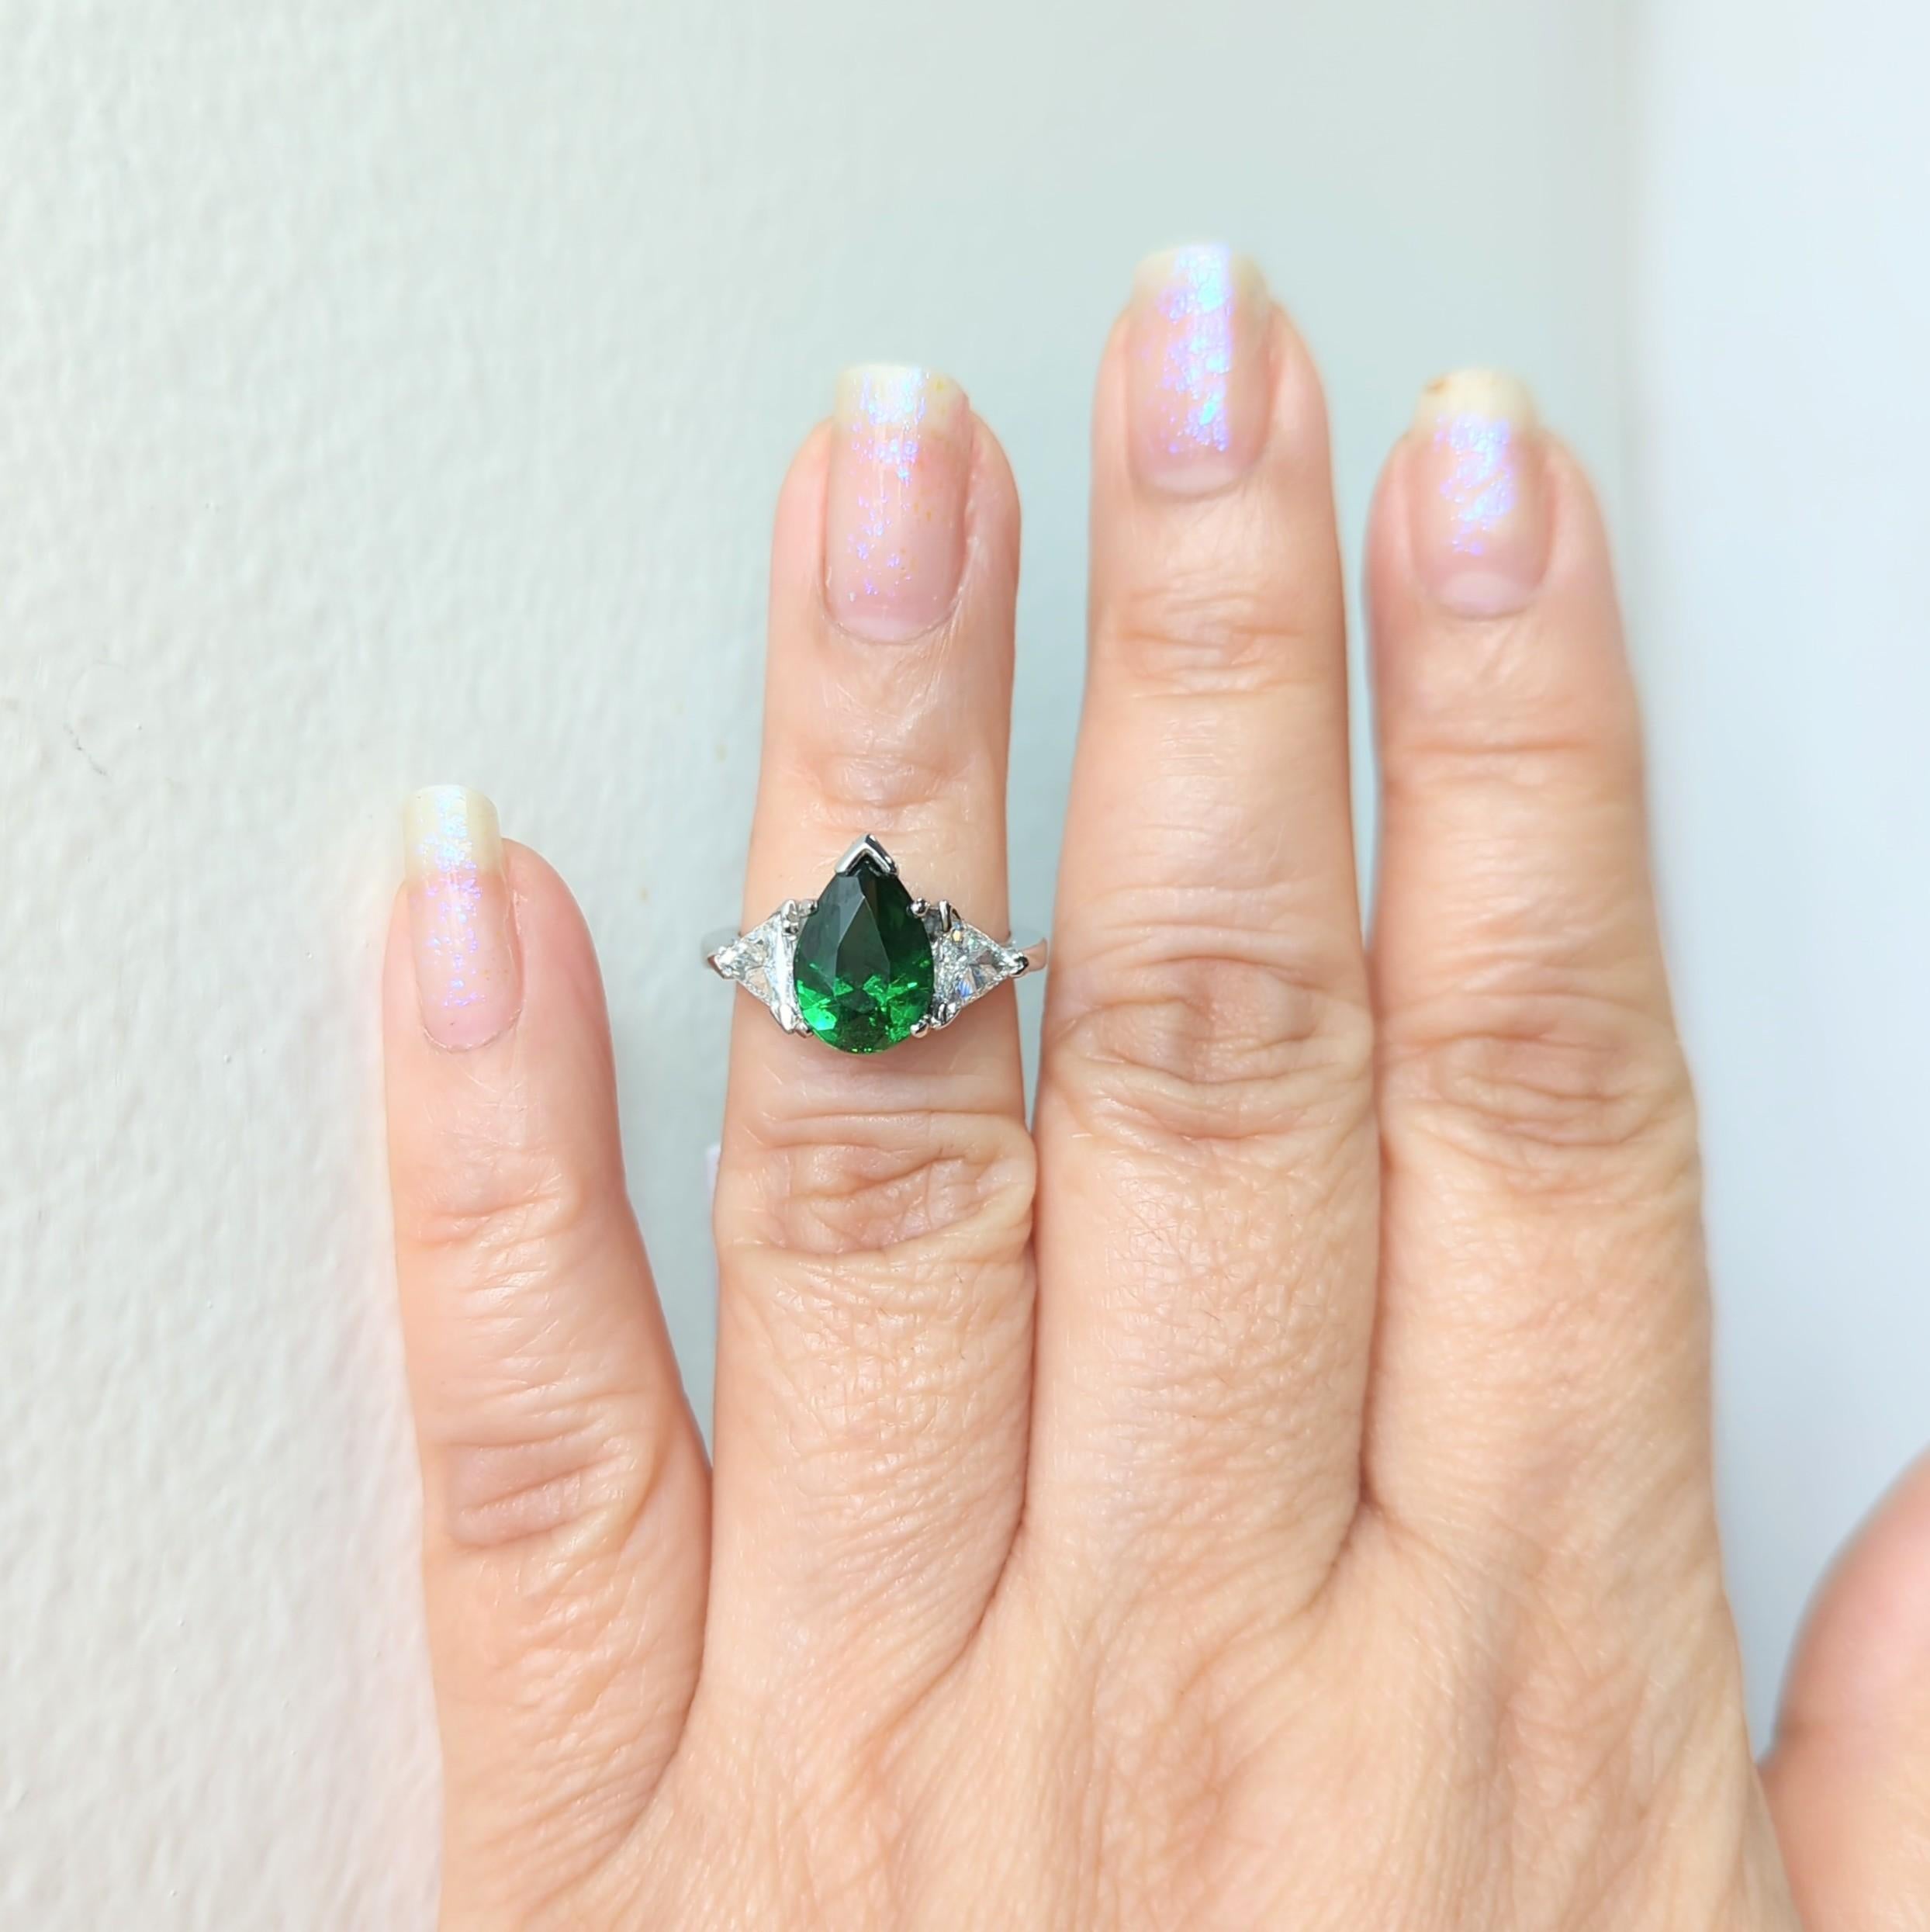 Beautiful bright green 3.07 ct. tsavorite pear shape with good quality white diamond trillions on either side.  Handmade in platinum.  Ring size 6.5+.